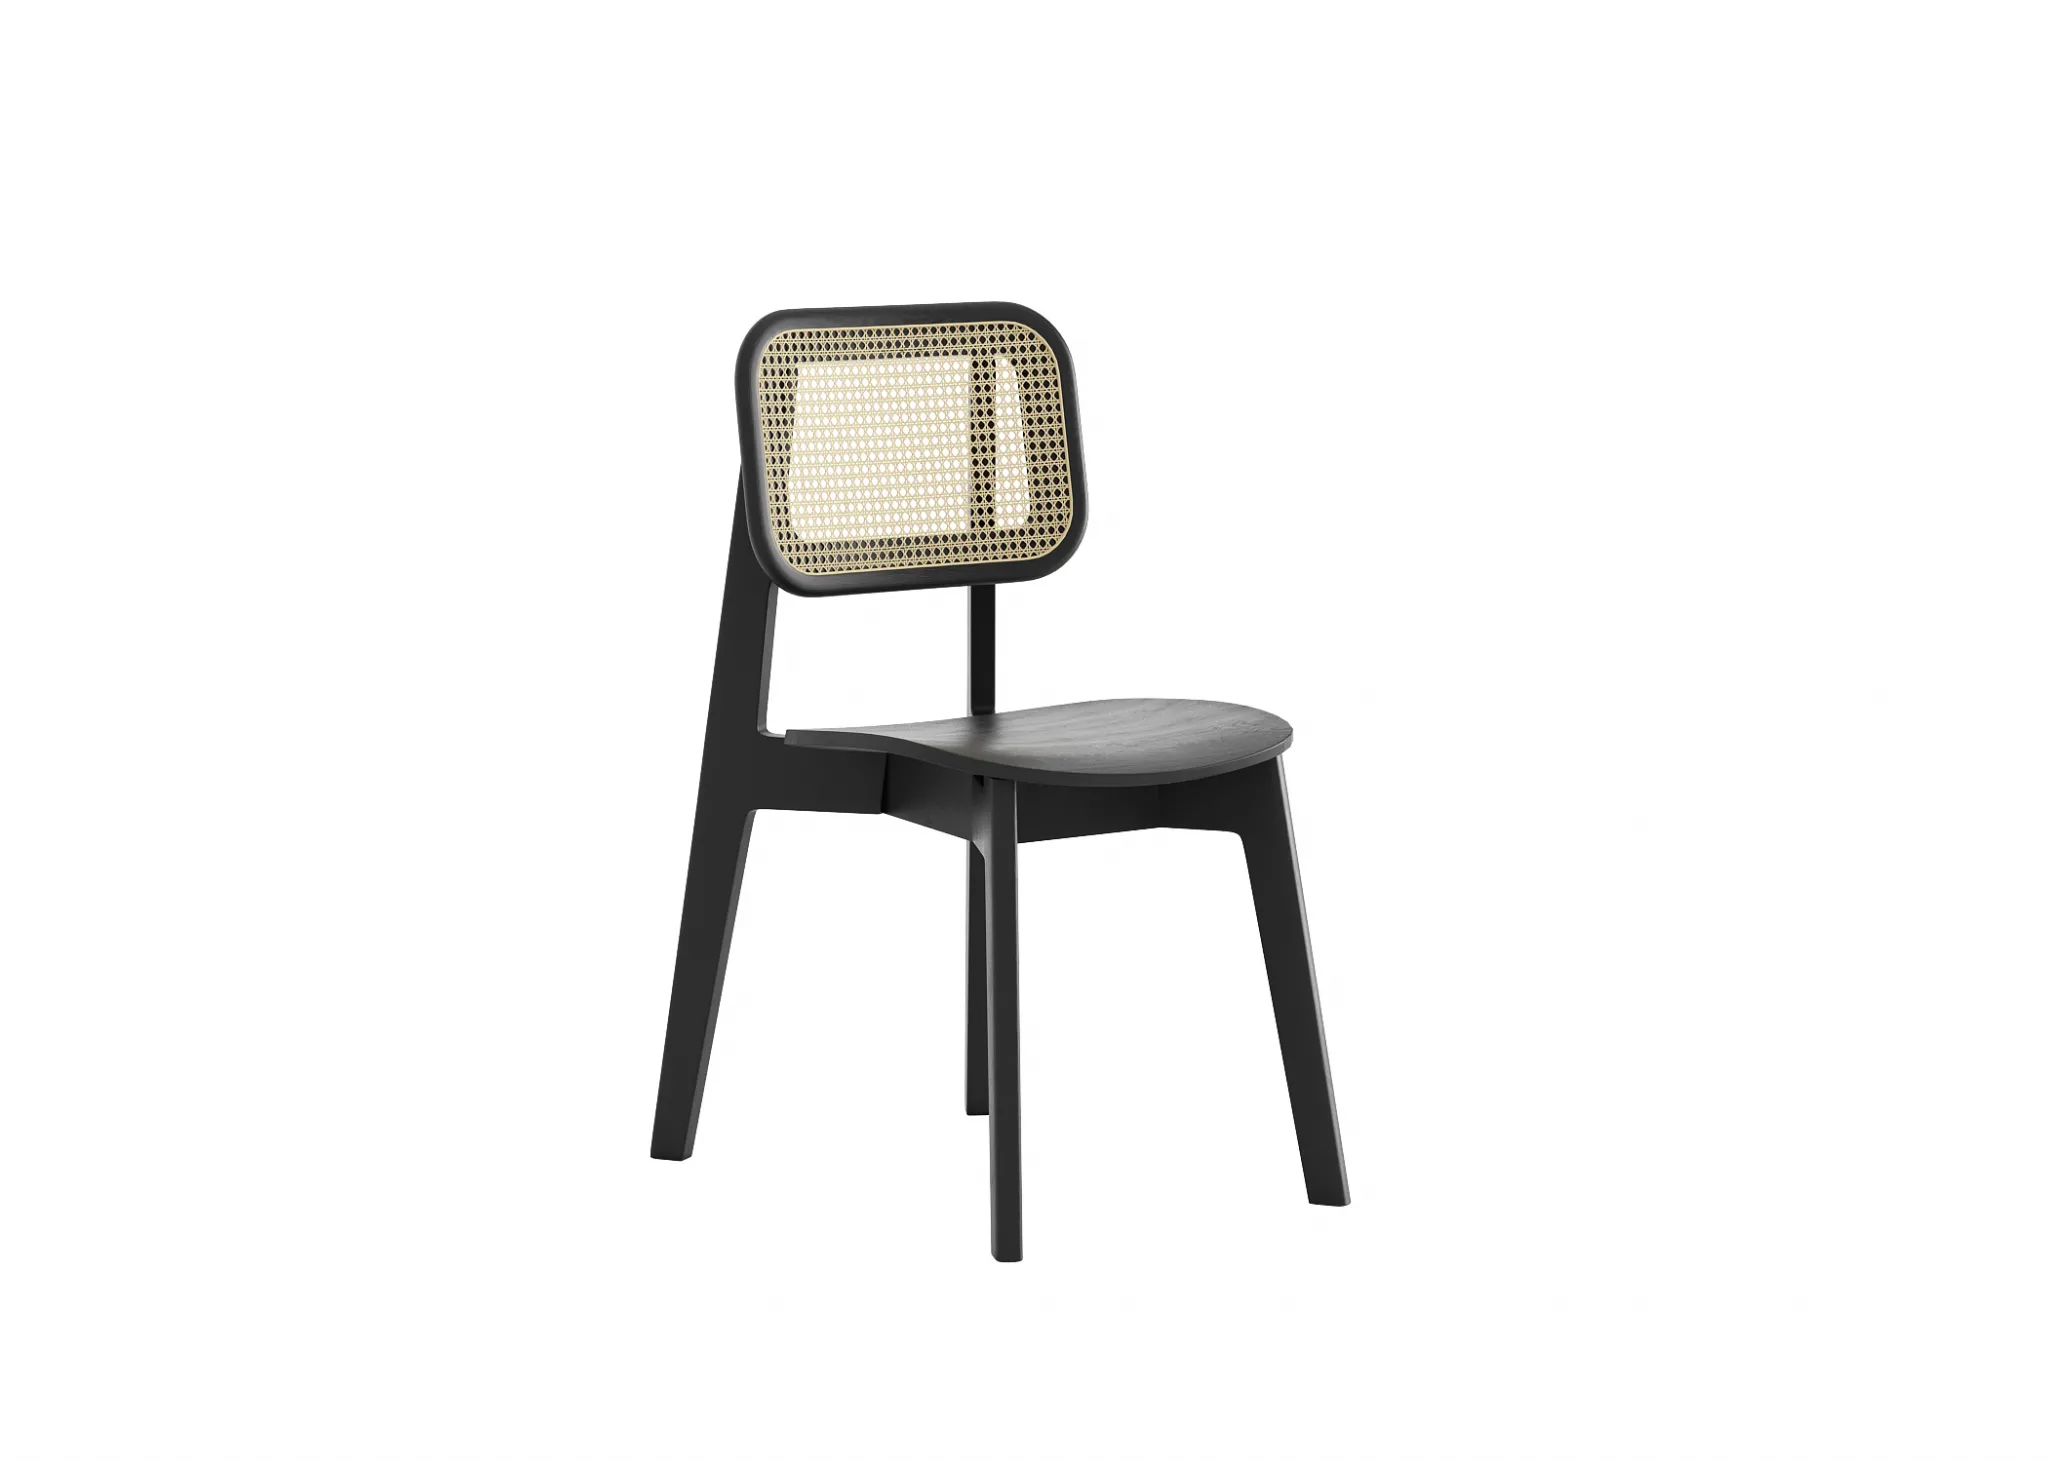 FURNITURE 3D MODELS – CHAIRS – 0501